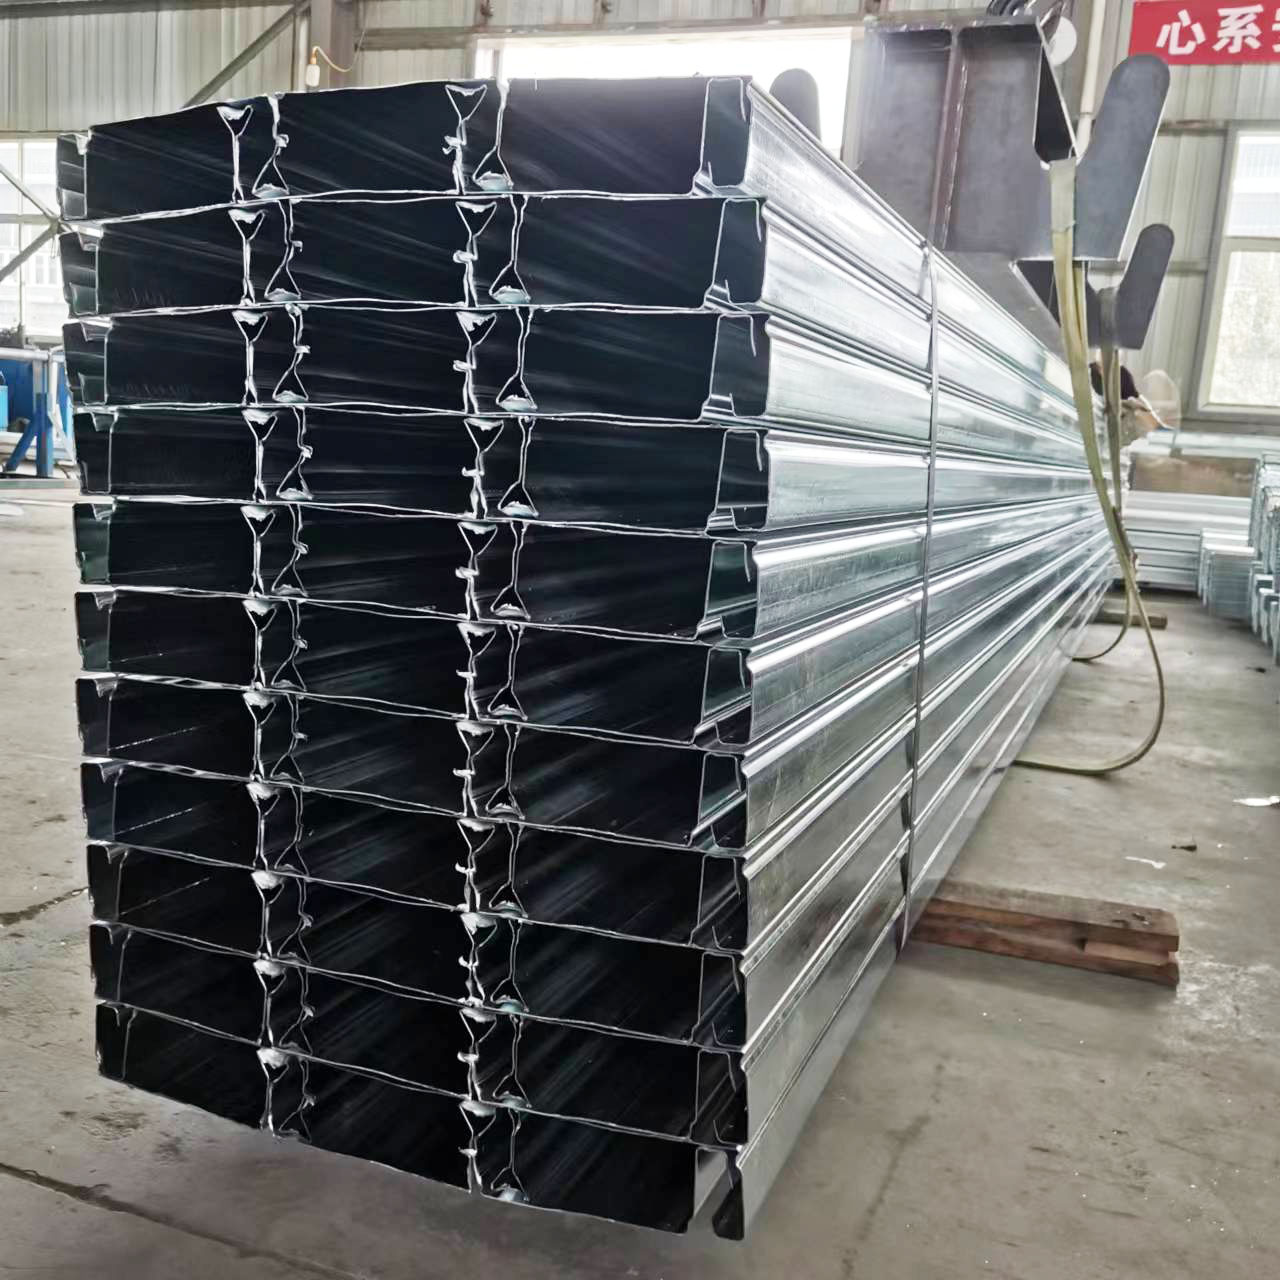 Colour Coated Profile Sheet - YX65-170-510 bearing Plate of closed floor from China – Bi Lan Tian